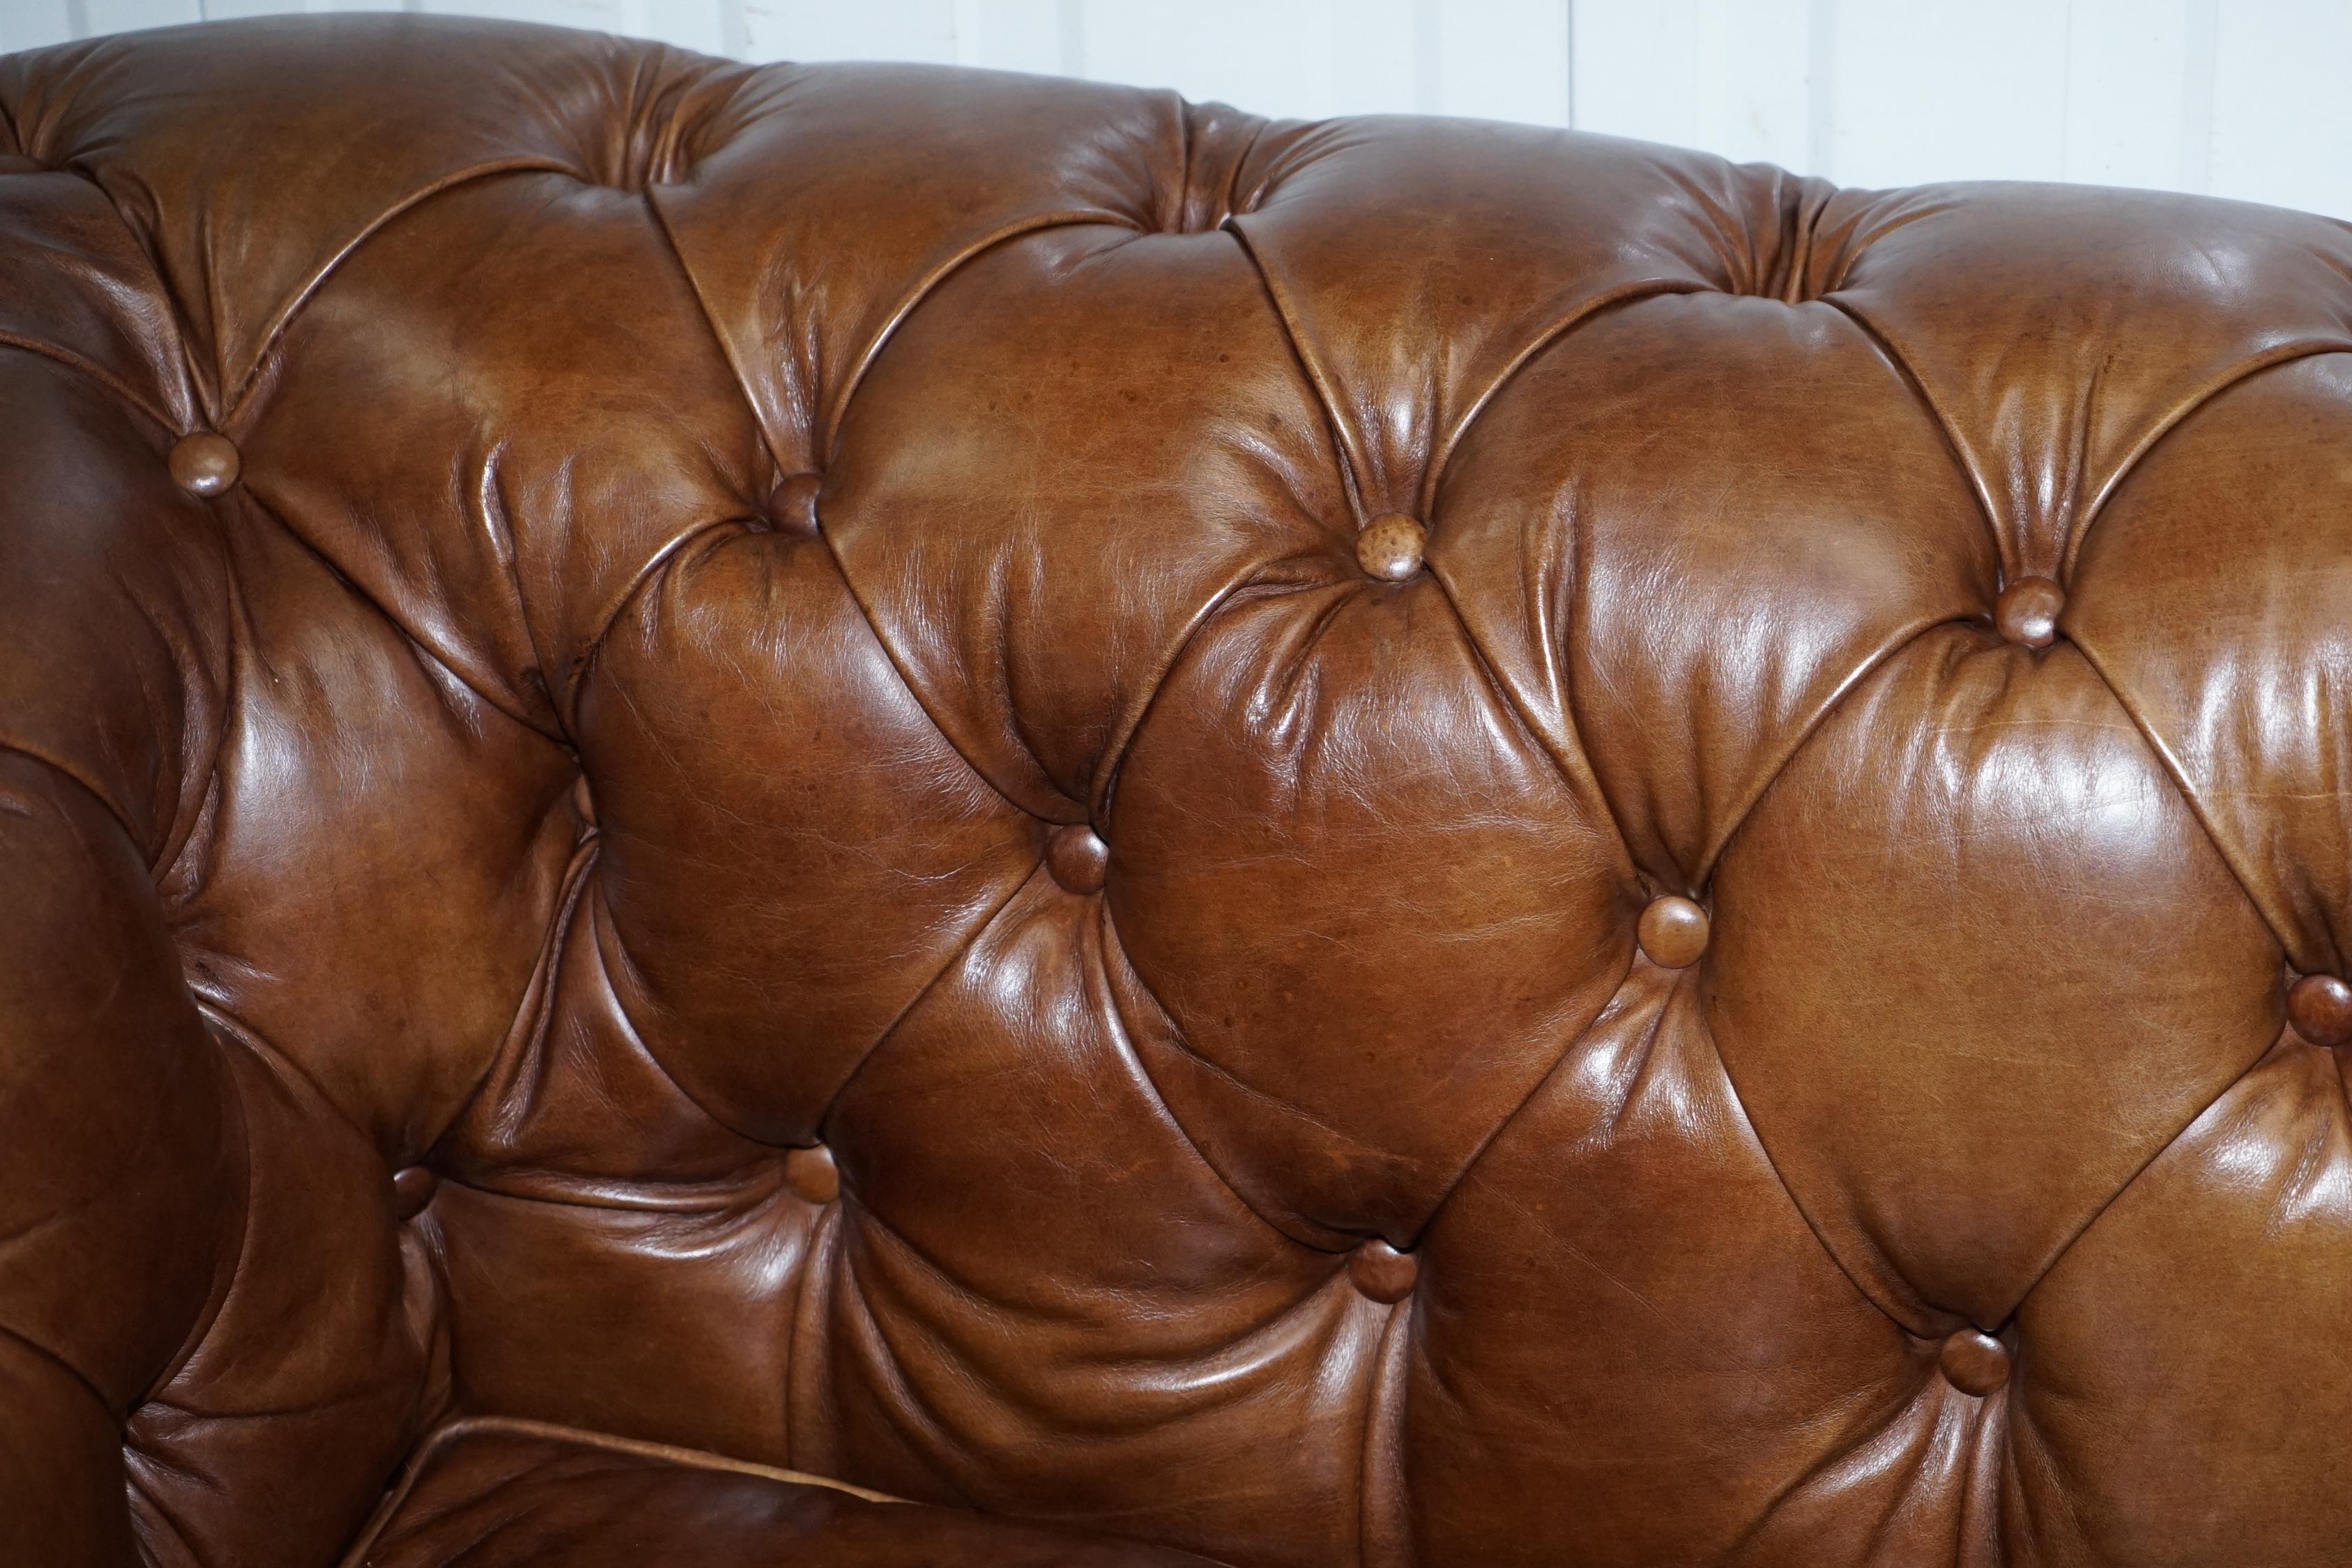 Contemporary 1 of 2 Timothy Oulton Halo Westminster Brown Leather Chesterfield Sofas